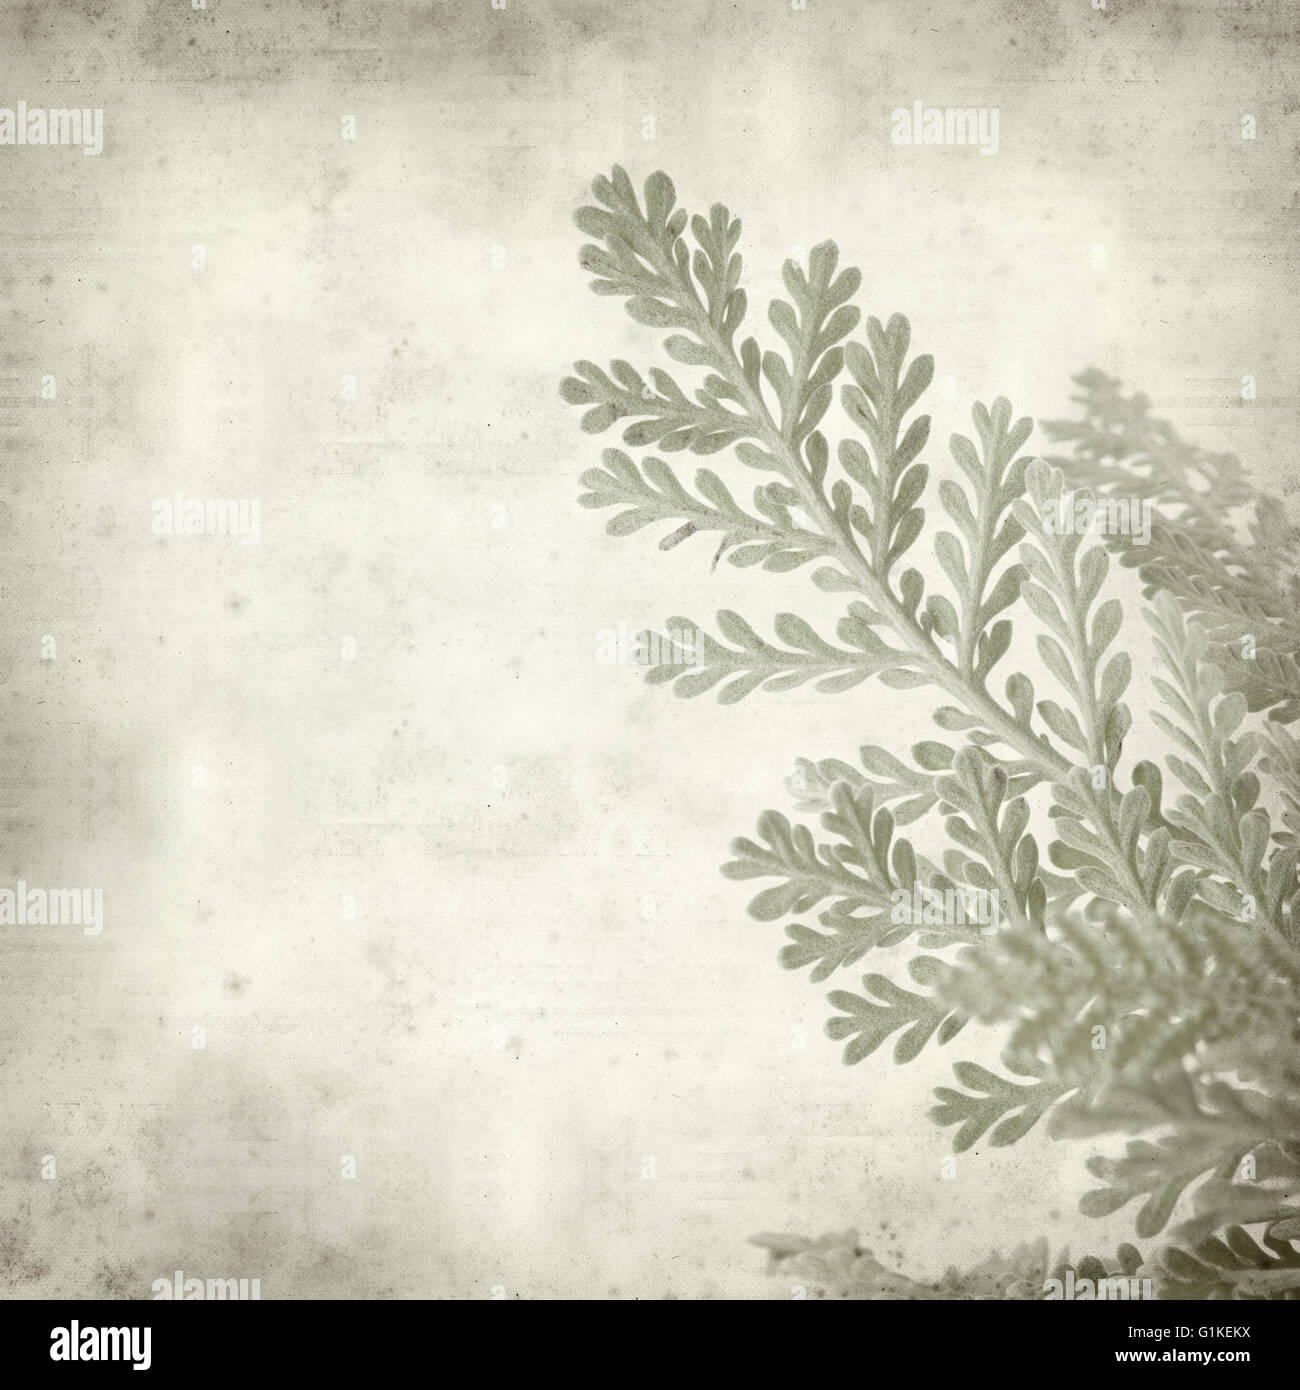 textured old paper background with silver tansy leaves Stock Photo